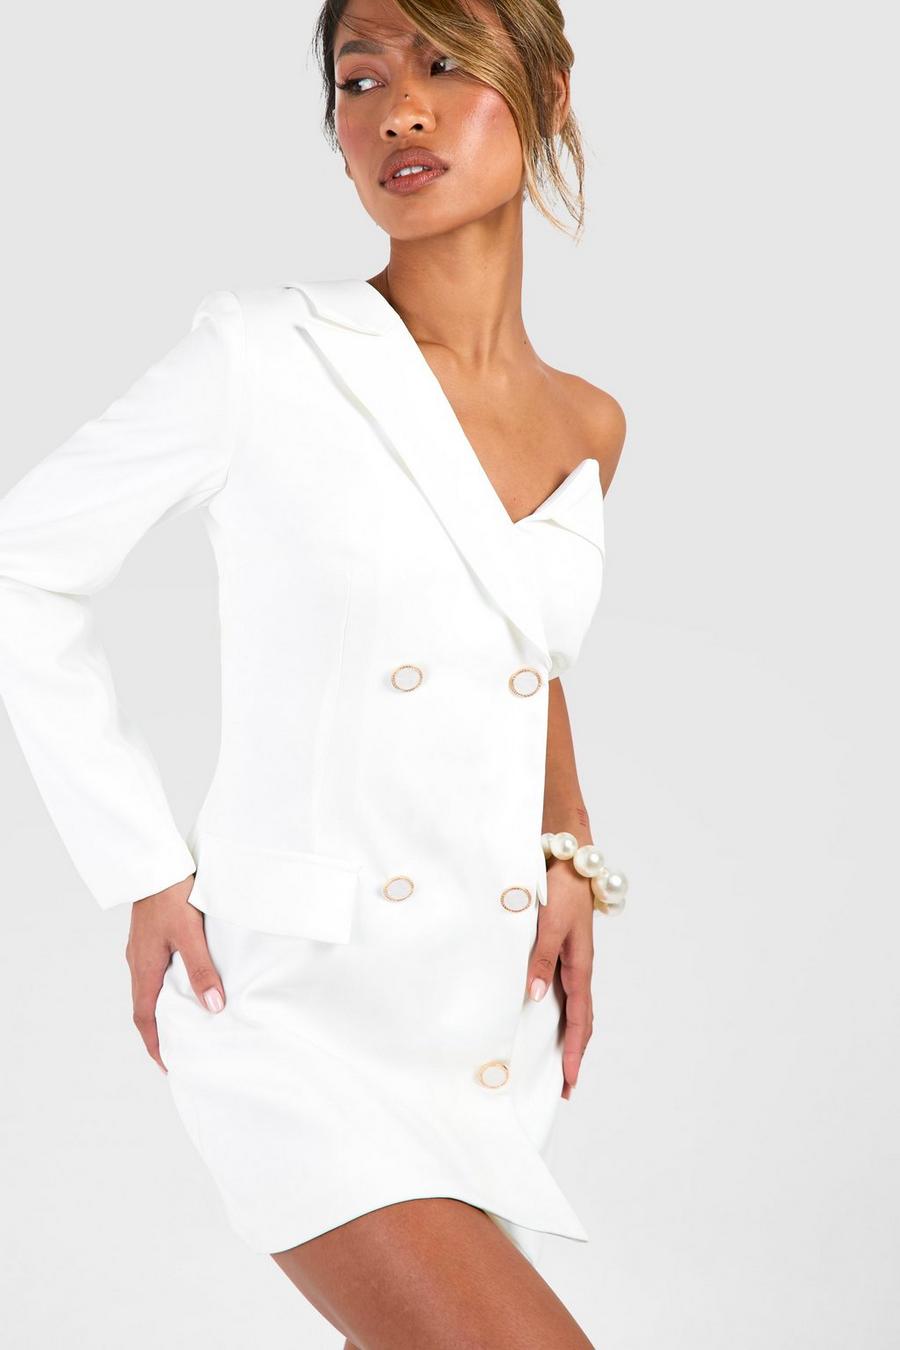 White Wedding Guest Suits